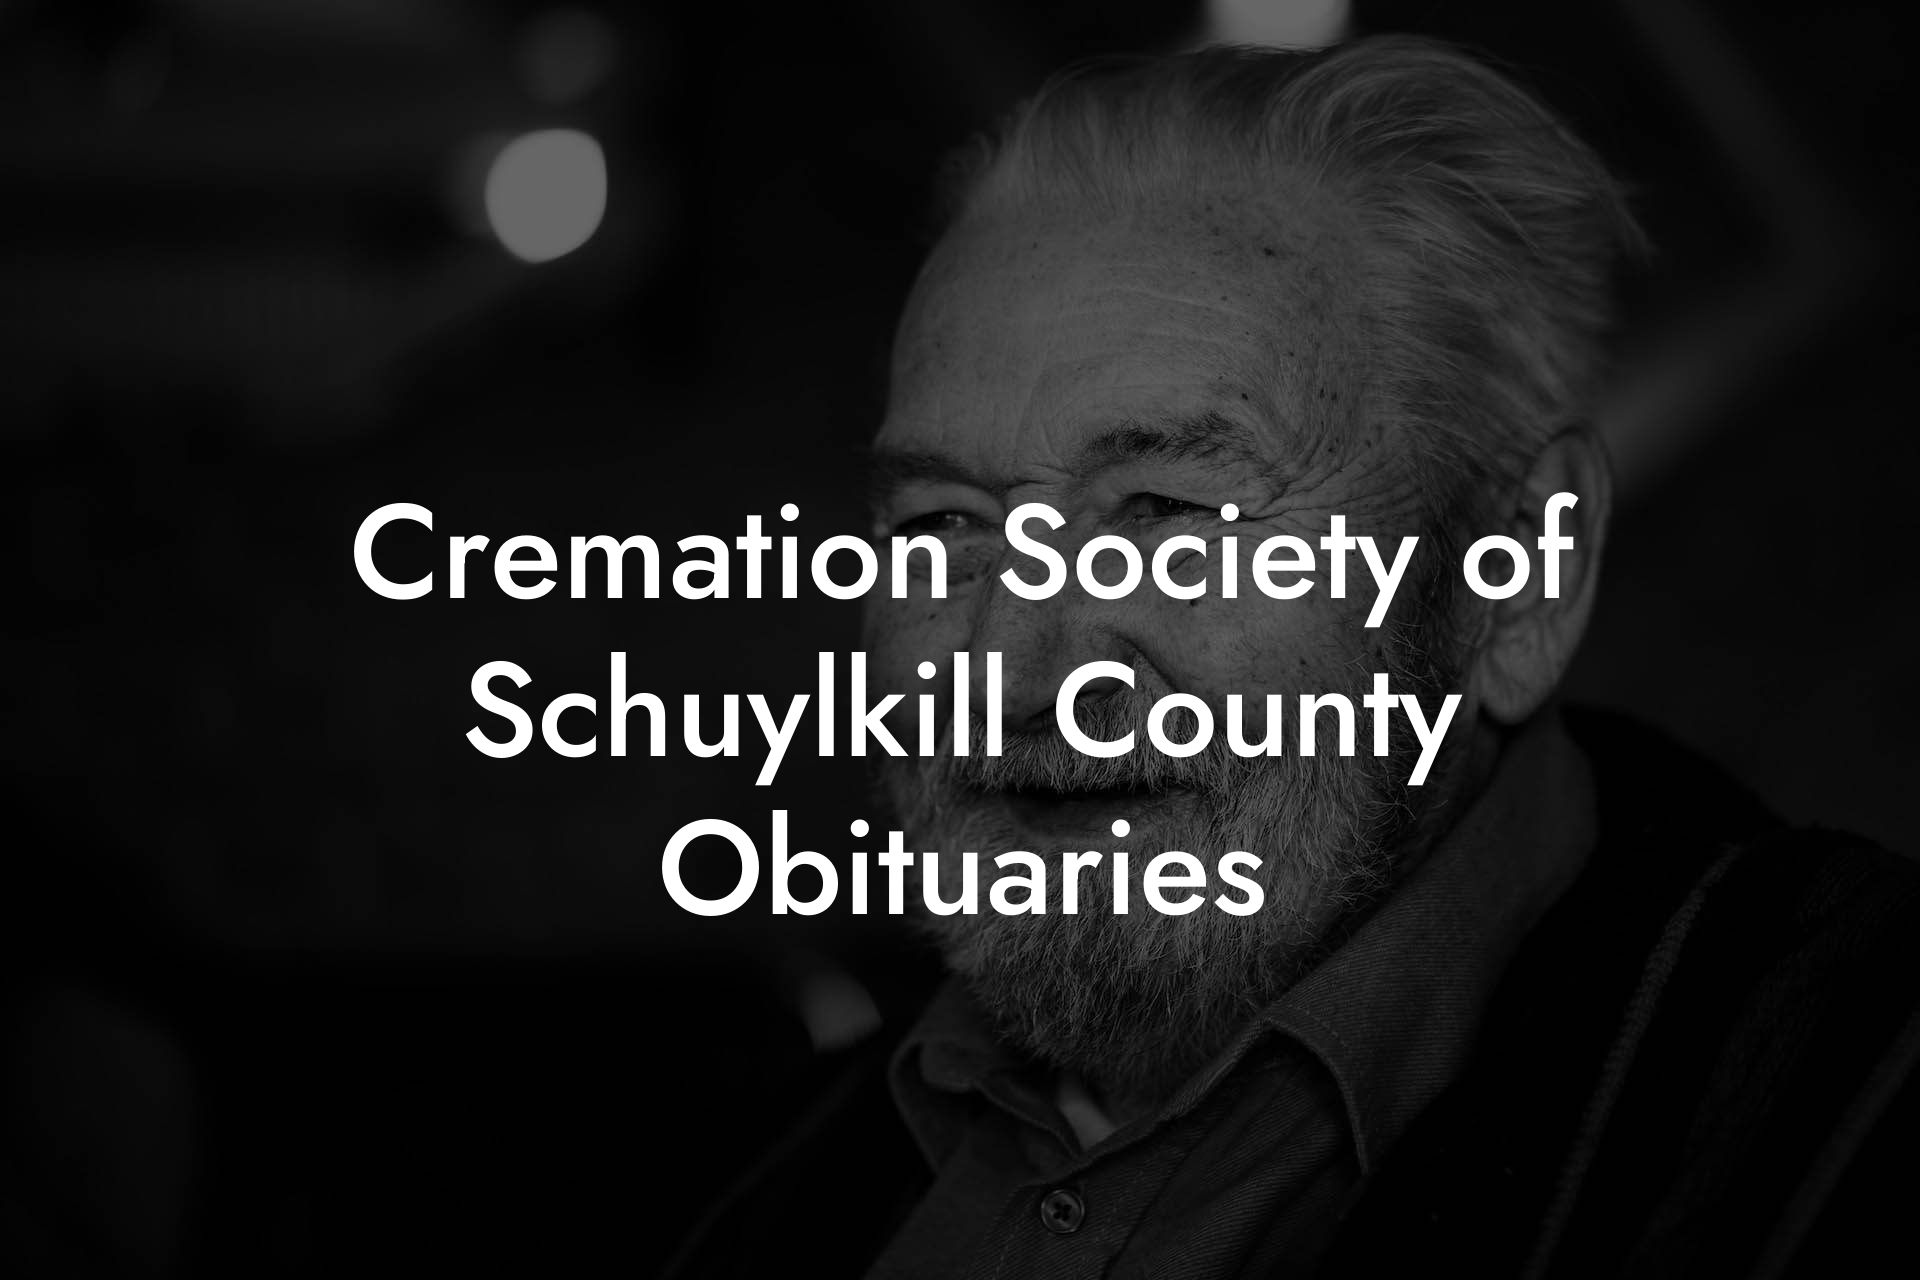 Cremation Society of Schuylkill County Obituaries